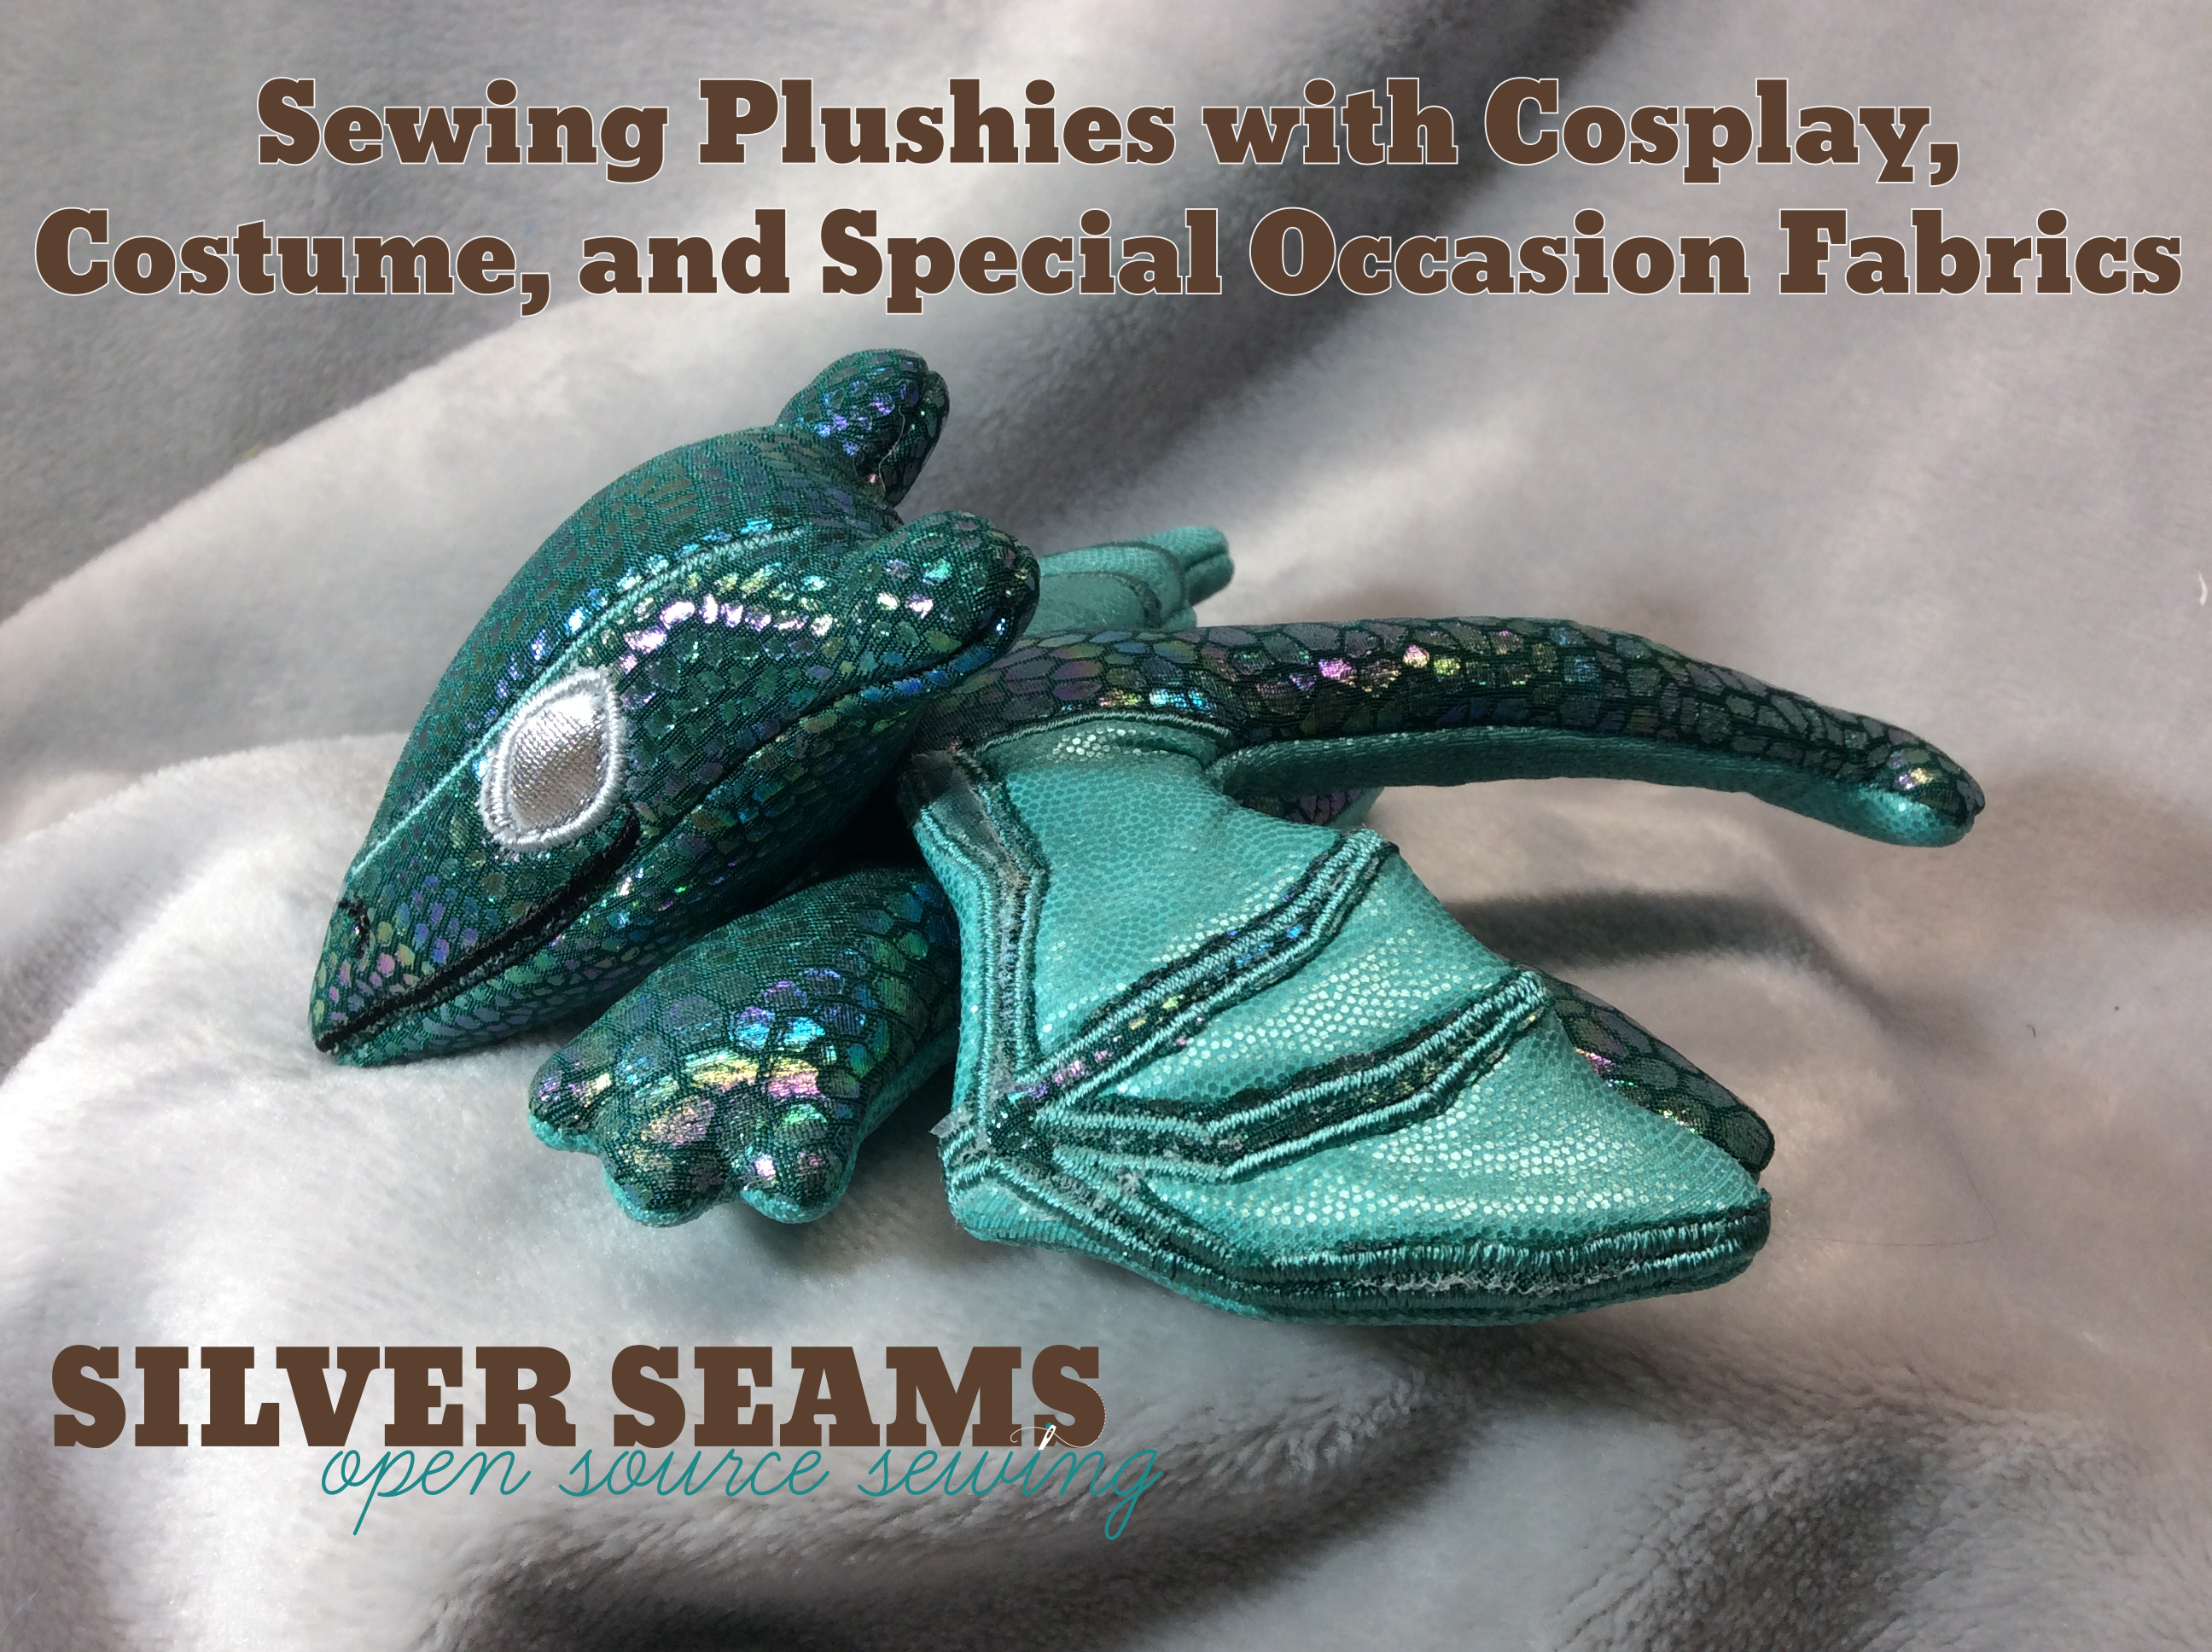 Sewing plushies with cosplay, costume, and special occasion fabrics